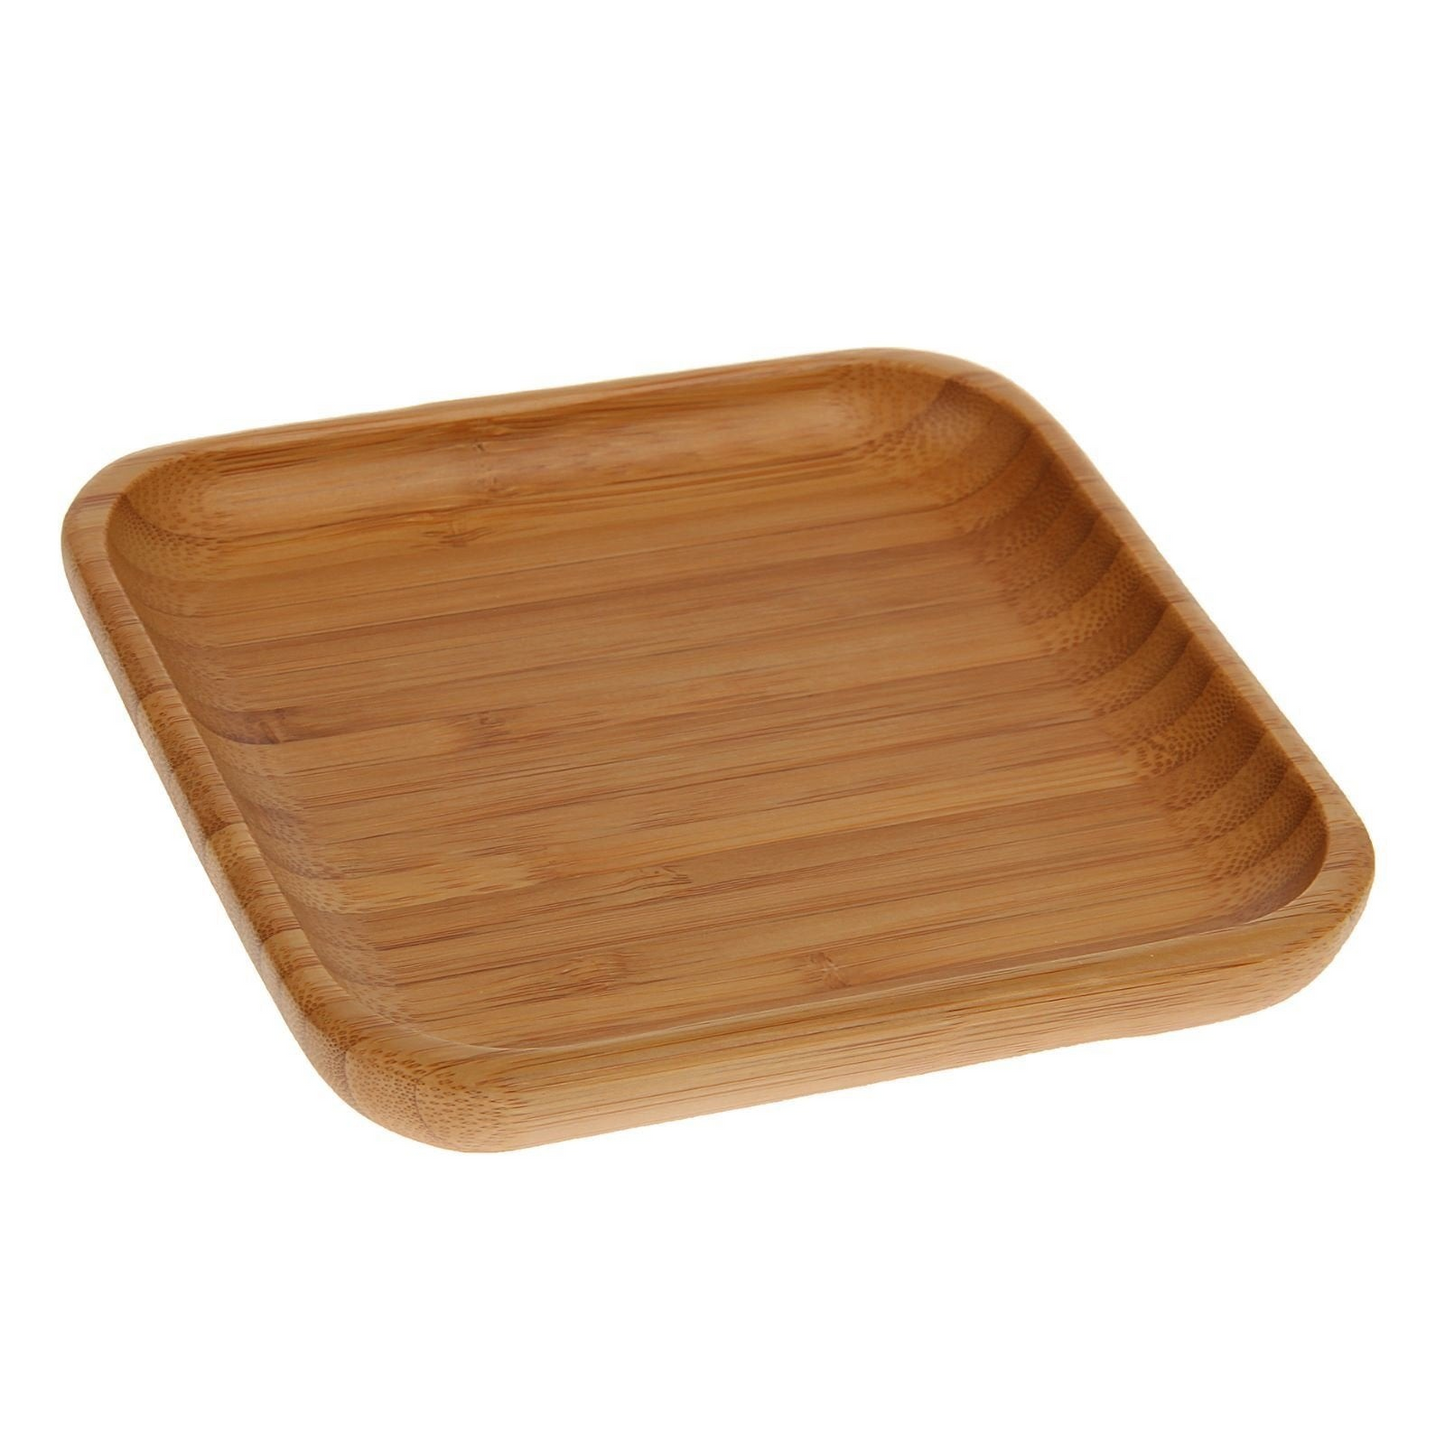 Wilmax Bamboo Wood Square Plate 6" X 6" |For Appetizers WL-771019/A